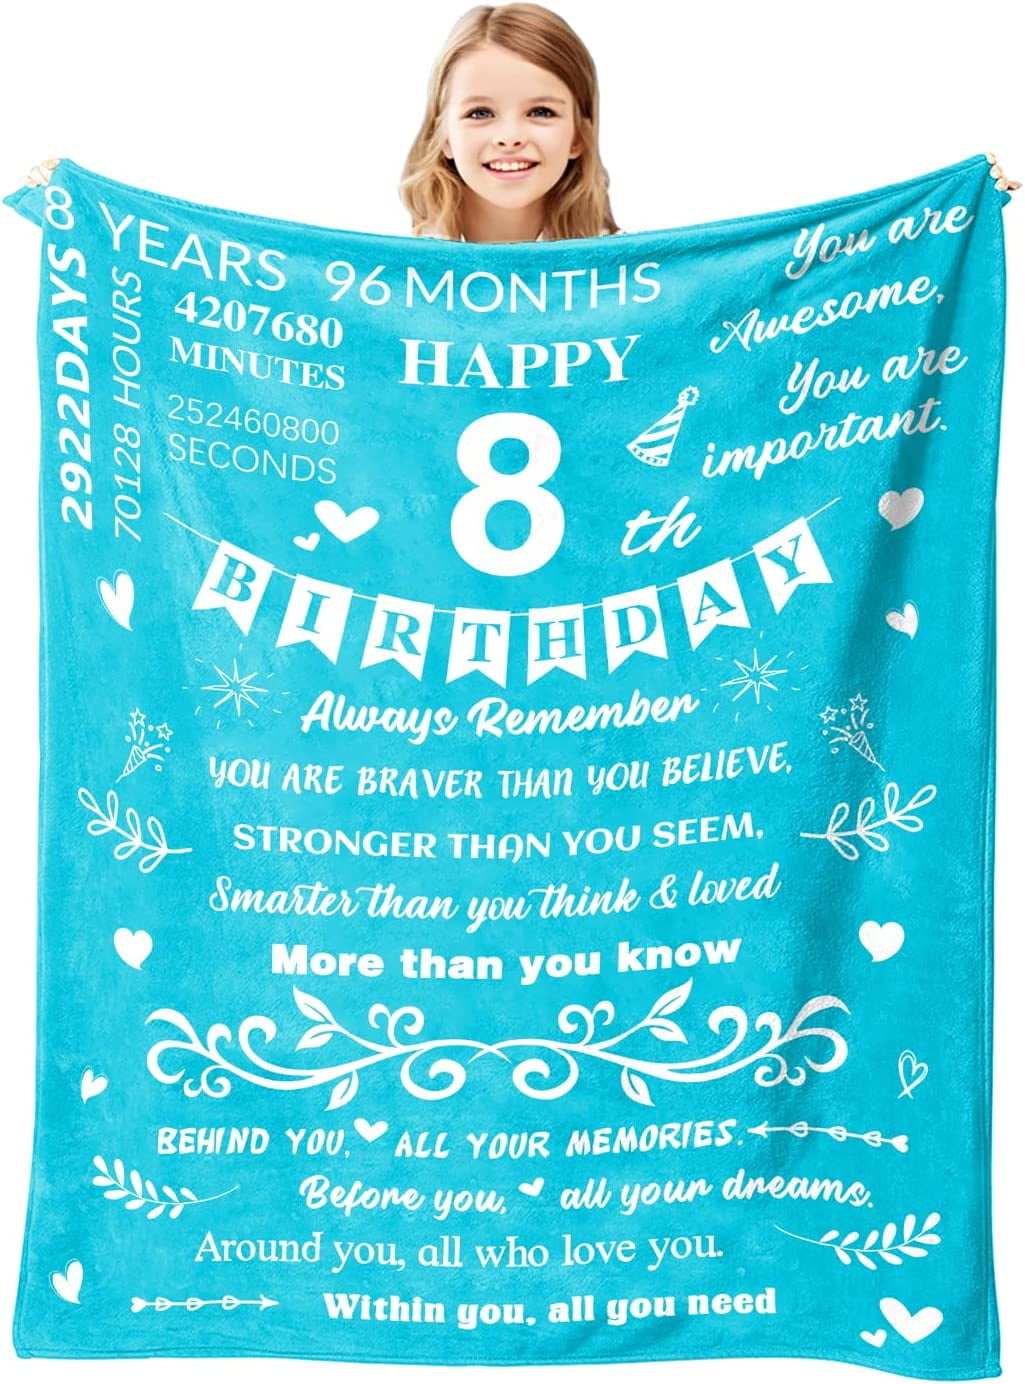 Qotuty Gifts for 14 Year Old Girl, 14 Year Old Girl Gift Ideas Blanket  50x60, Birthday Gifts for 14 Year Old Girl, 14th Birthday Decorations for